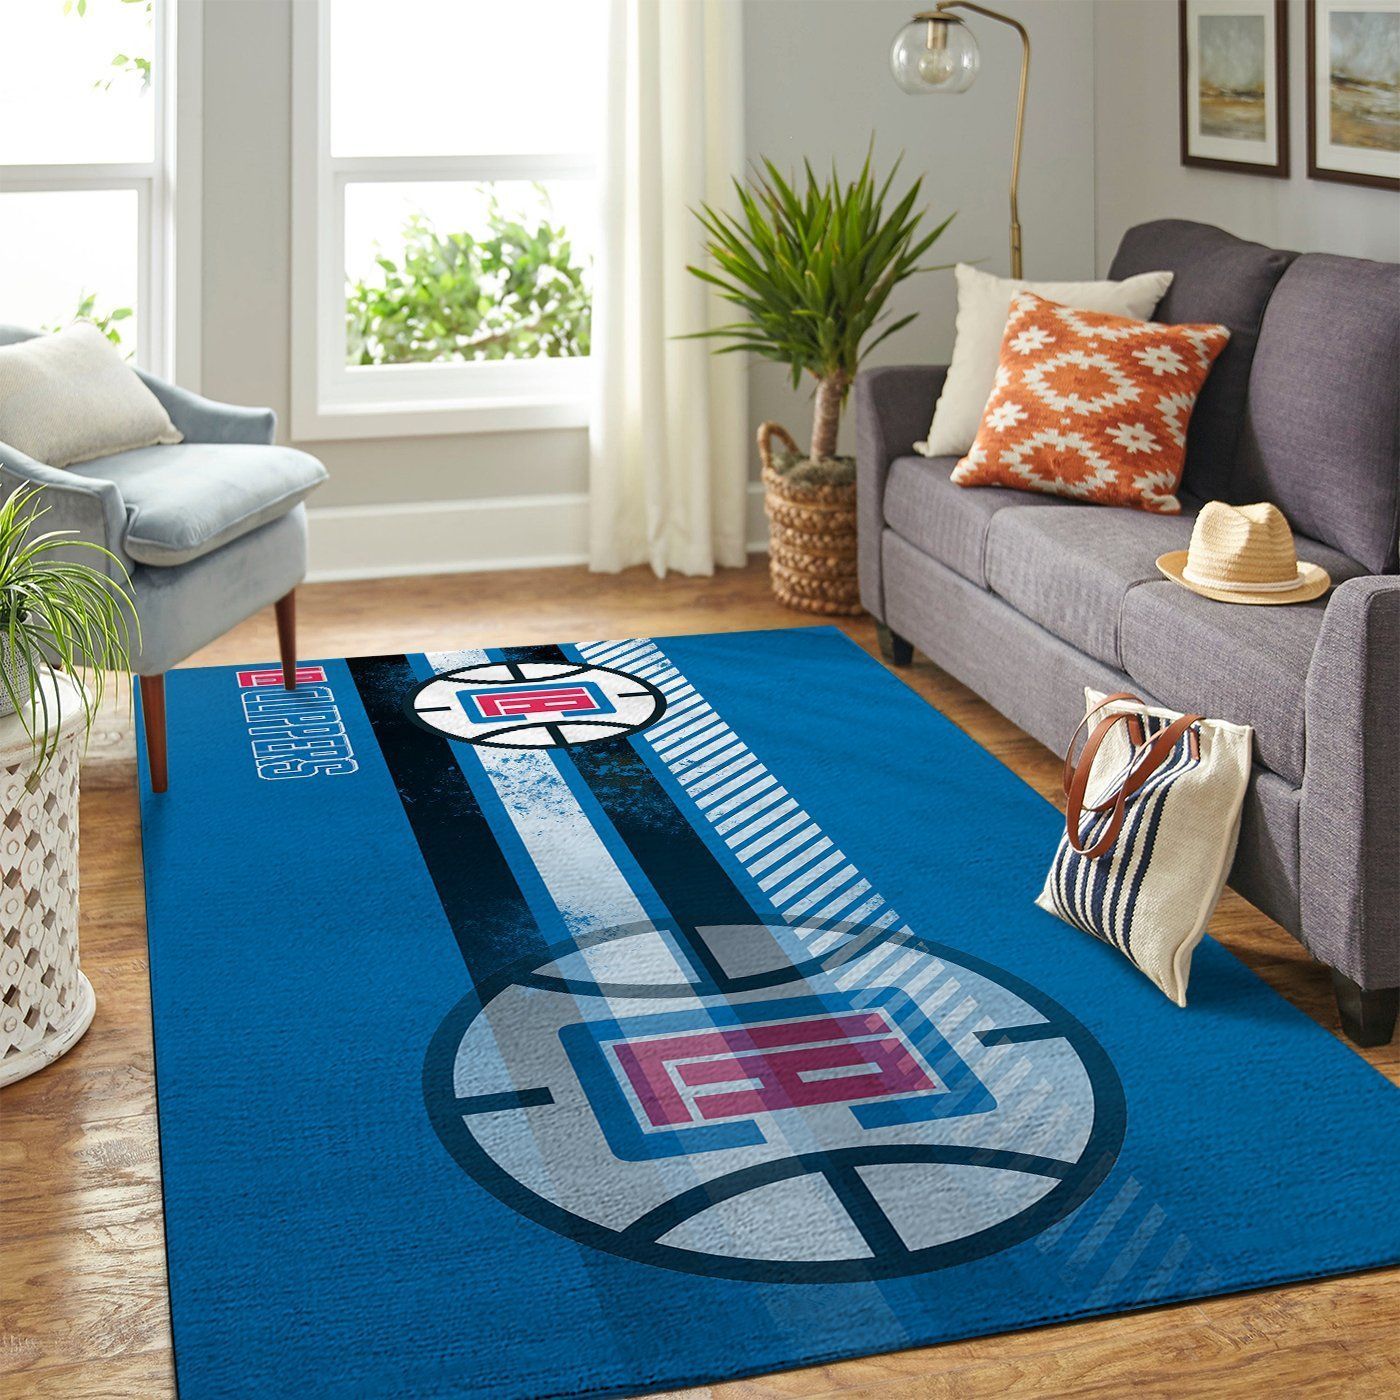 La Clippers Nba Team Logo Nice Gift Home Decor Rectangle Area Rug - Indoor Outdoor Rugs